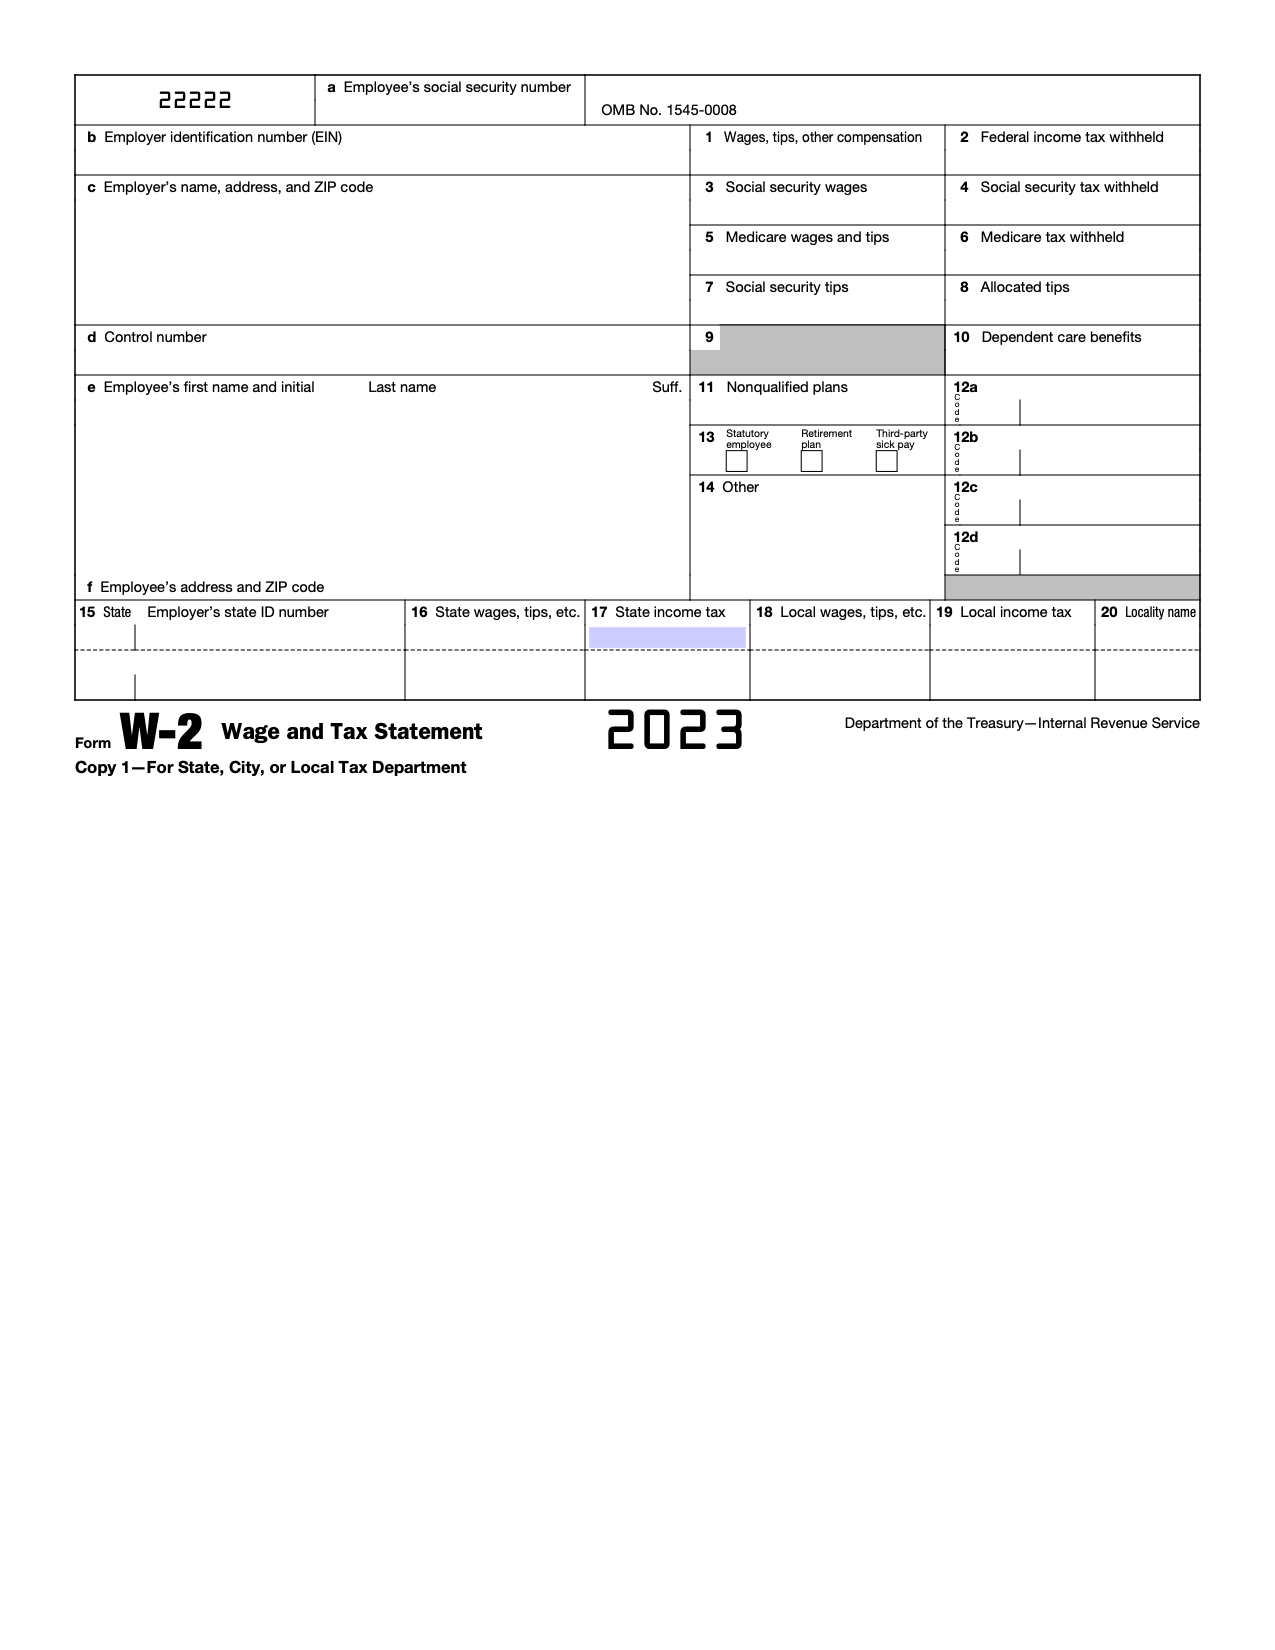 Free Irs Form W-2 | Wage And Tax Statement - Pdf – Eforms pertaining to W2 Form 2022 Printable Free